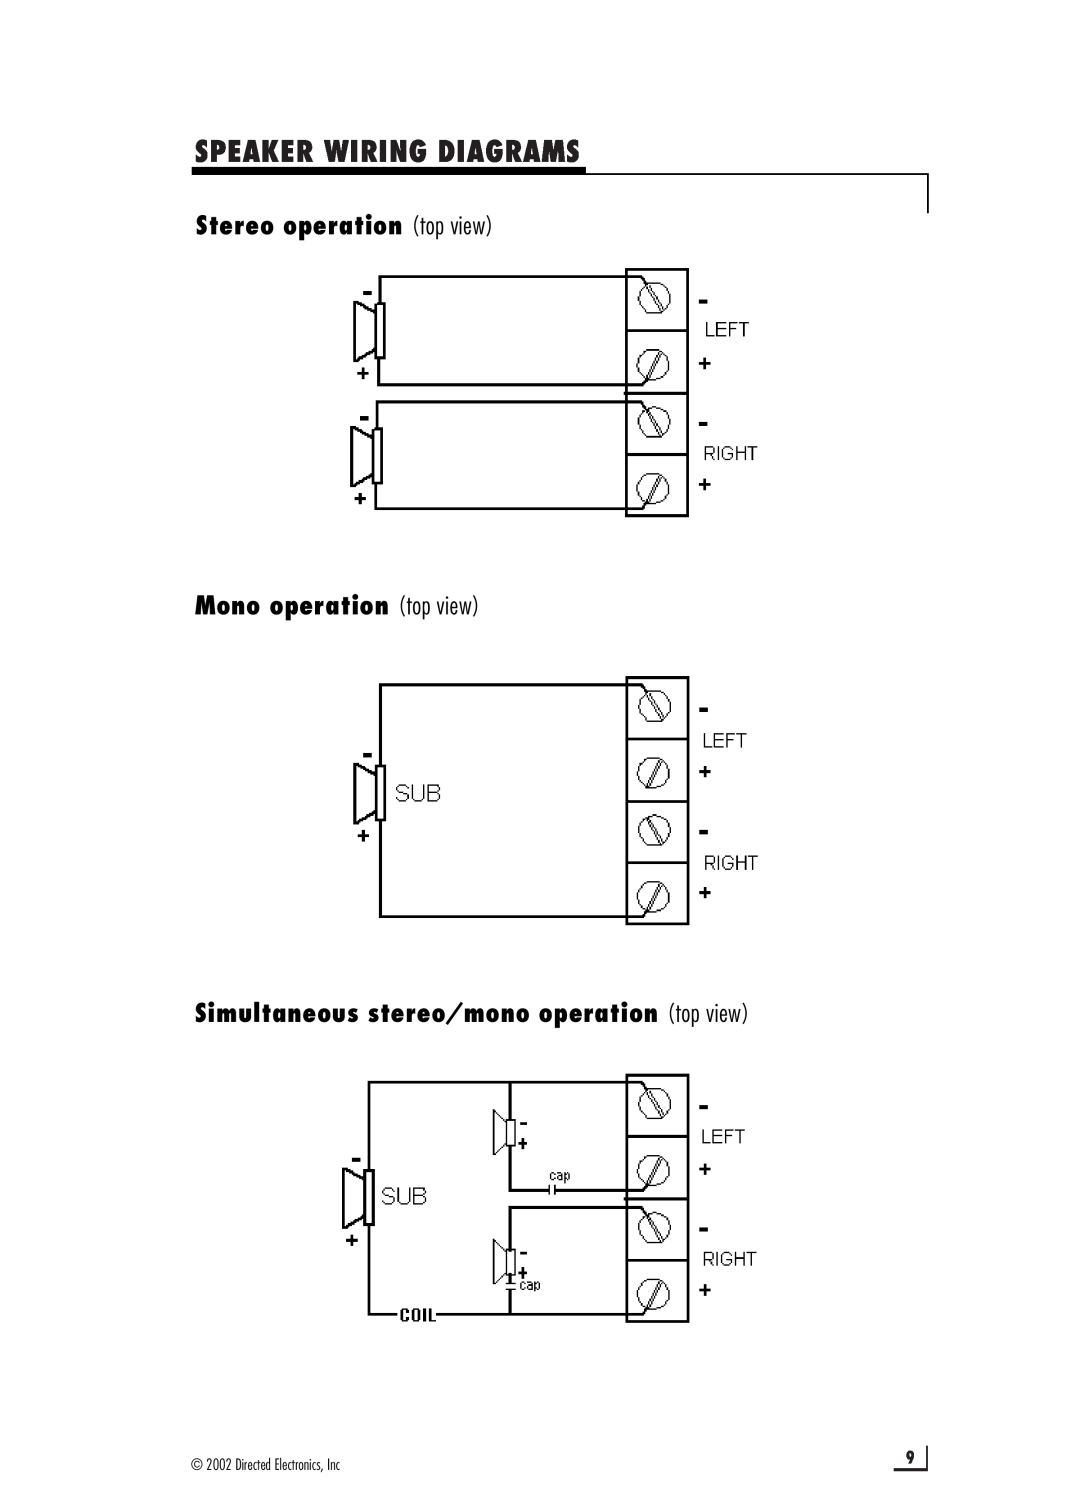 Directed Electronics 2400 manual Speaker Wiring Diagrams, Stereo operation top view Mono operation top view 